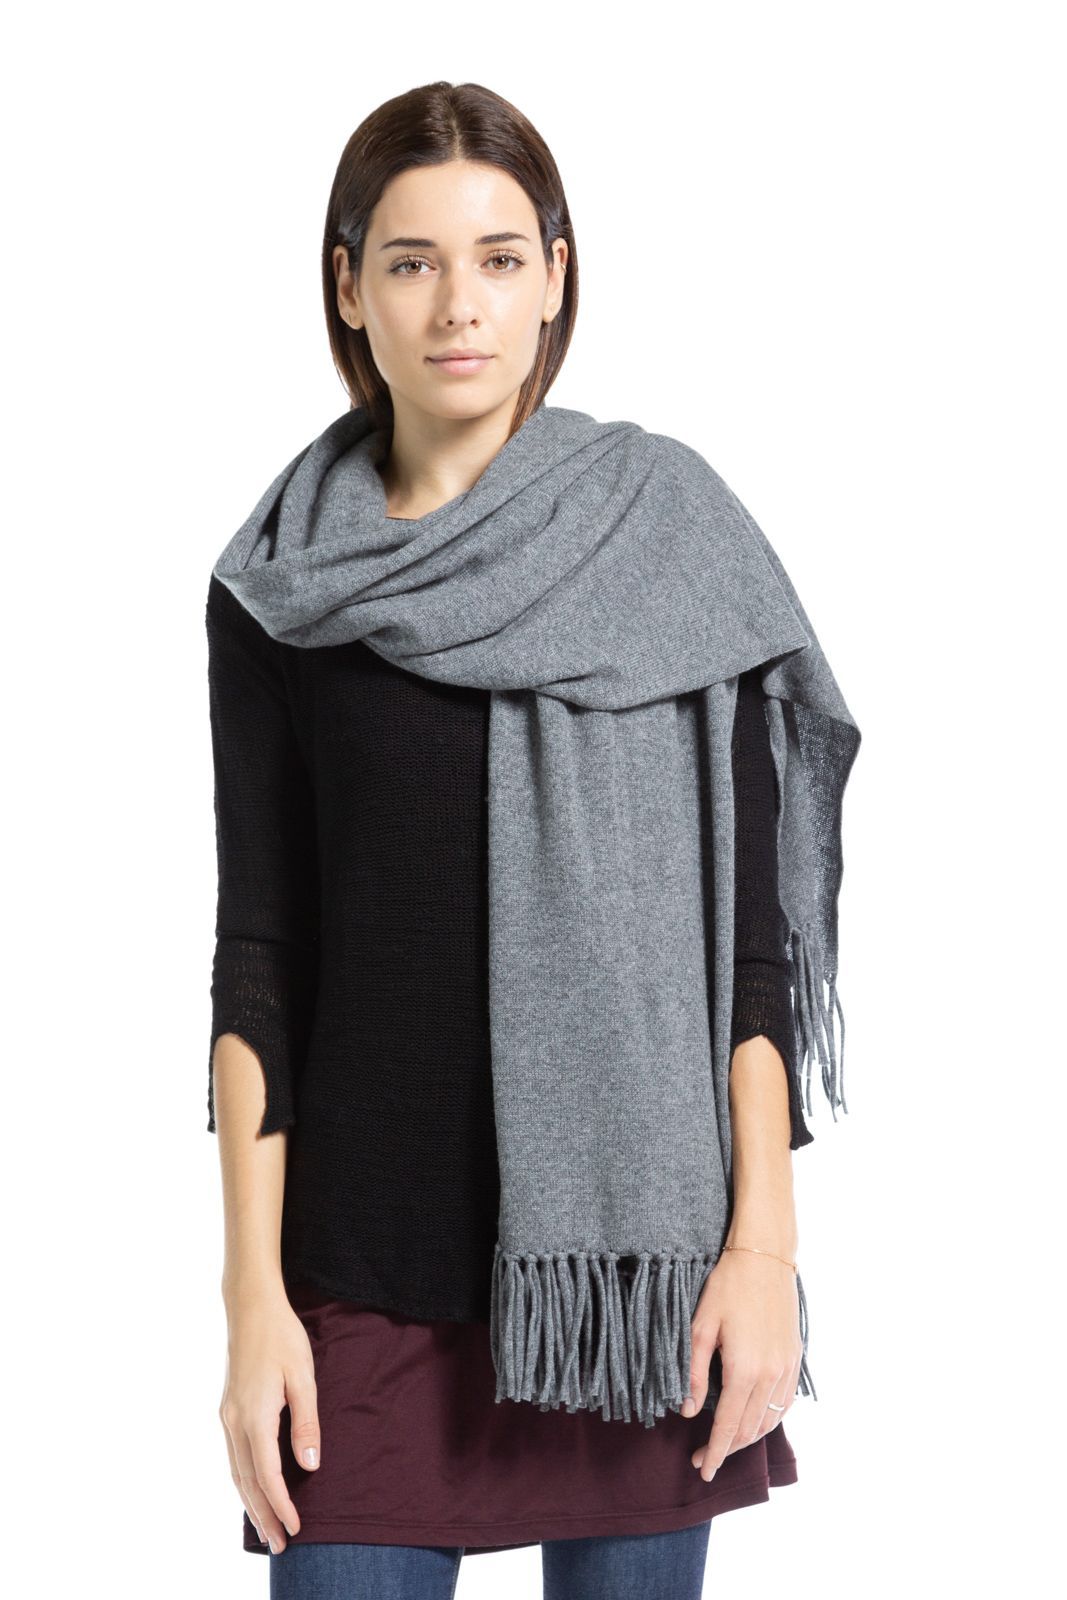 Women's 100% Pure Cashmere Knit Shawl Wrap with Fringe and Gift Box